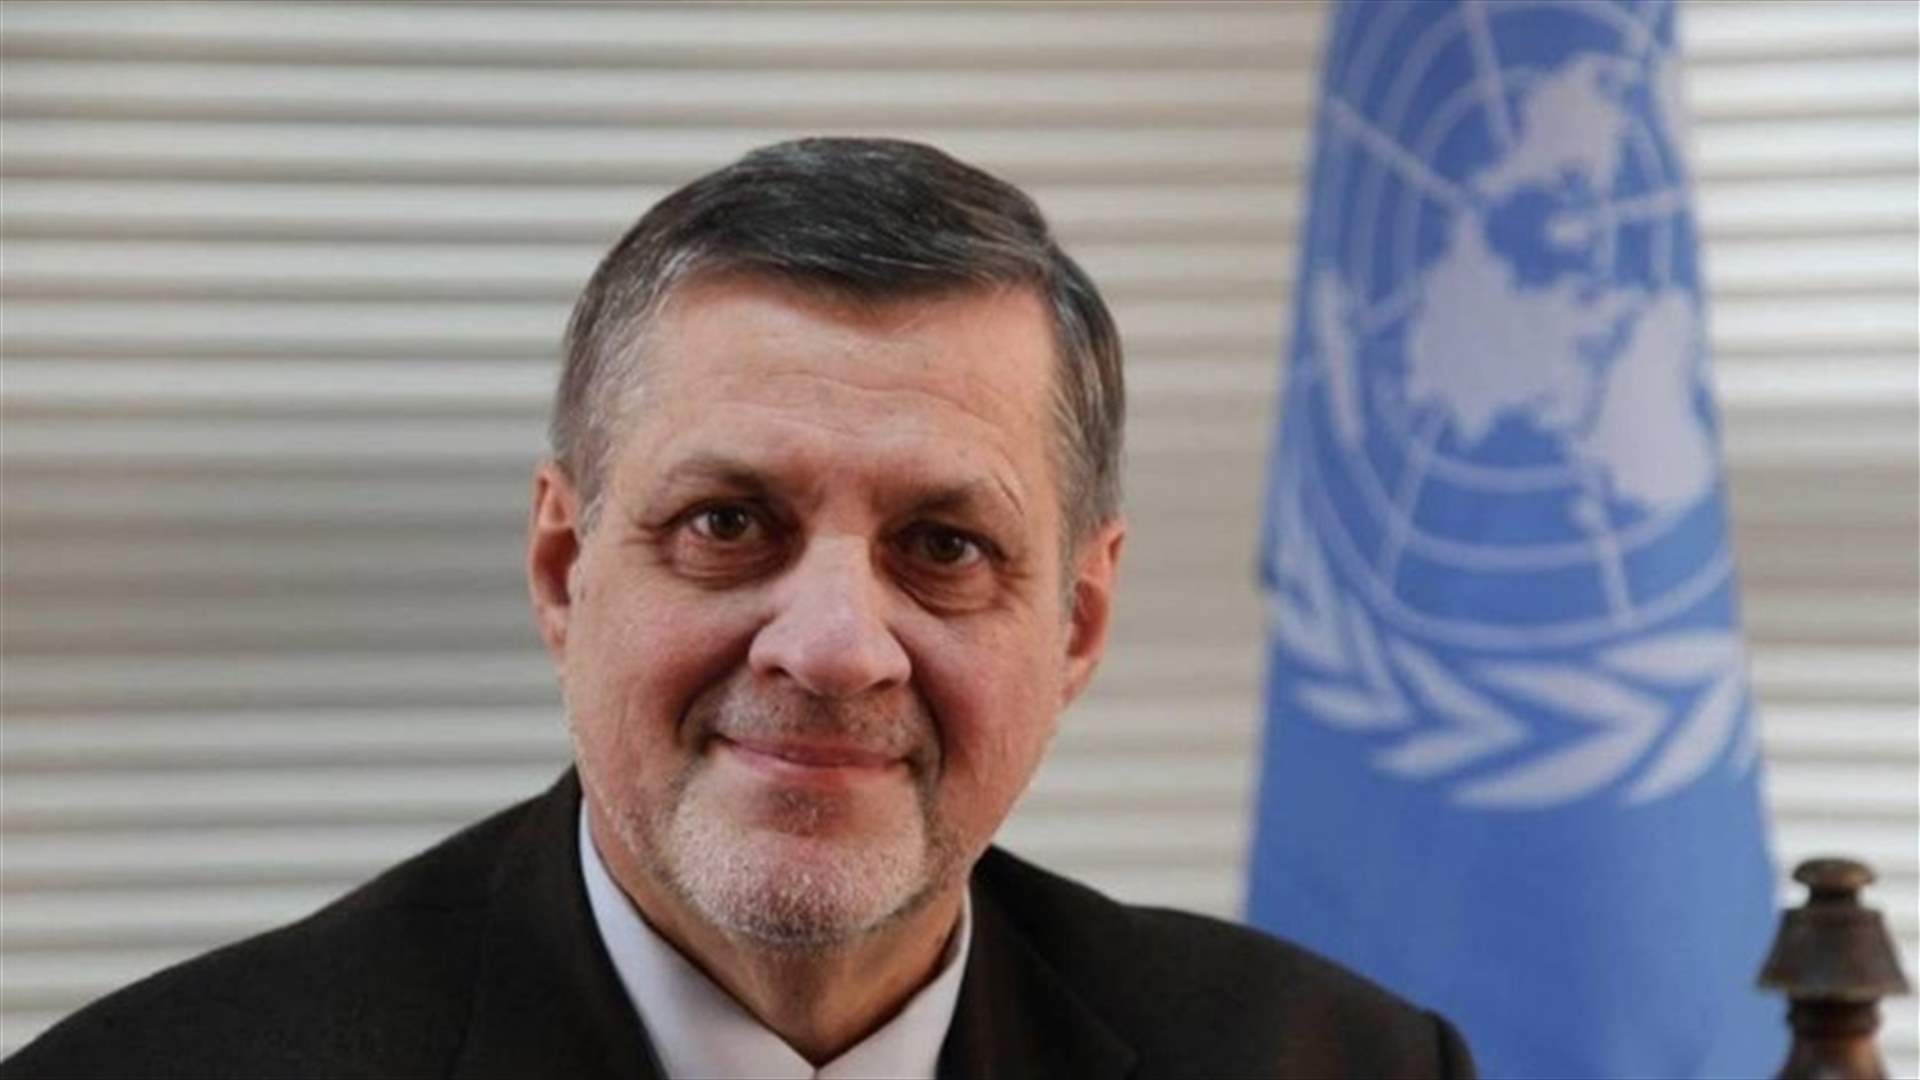 UN’s Jan Kubis calls for formation of a credible, competent and inclusive government